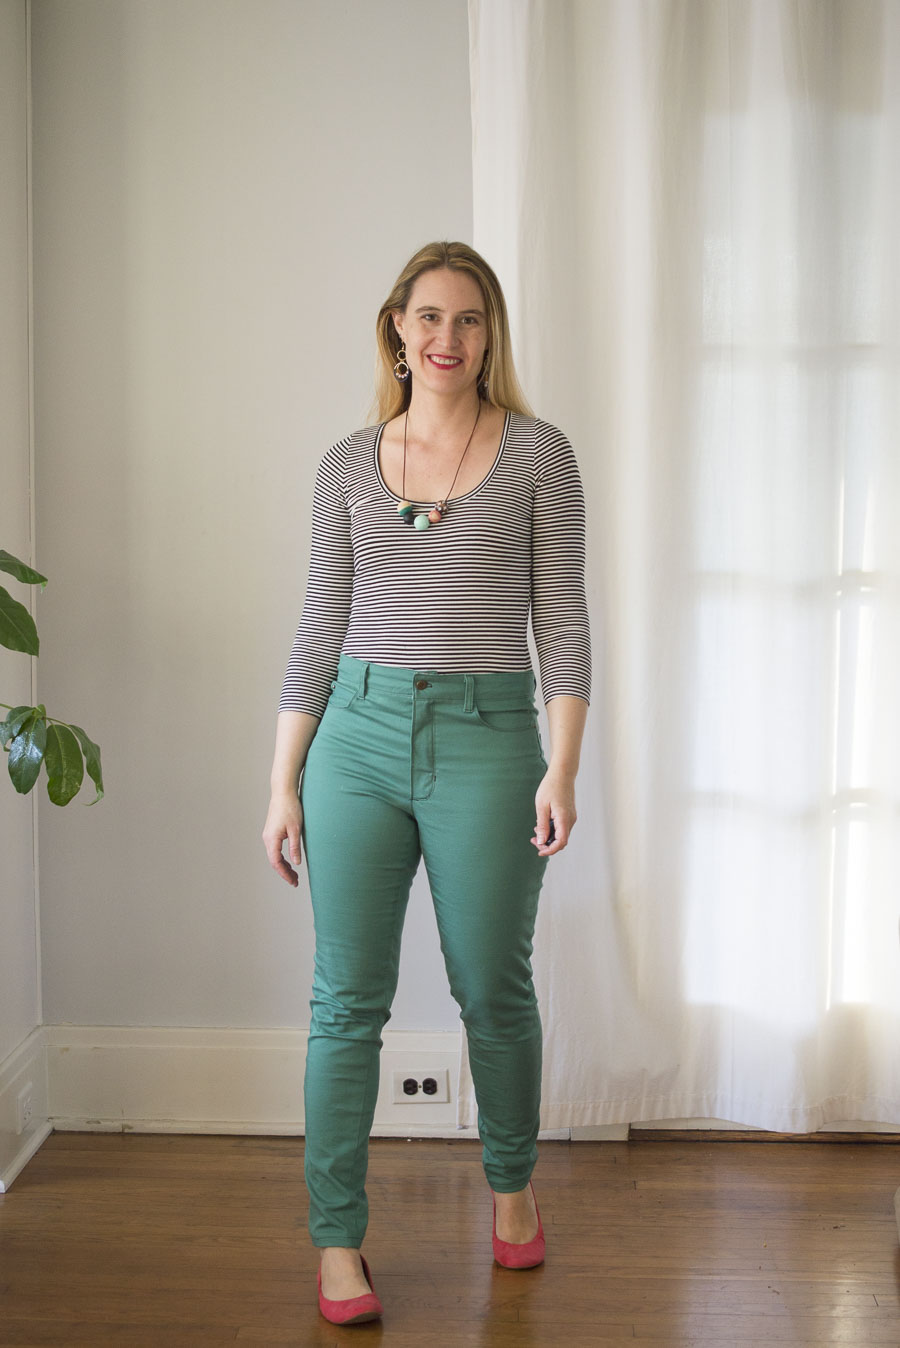 Nettie Bodysuit and Ginger Jeans : IndieSew Blogger Team - A HAPPY